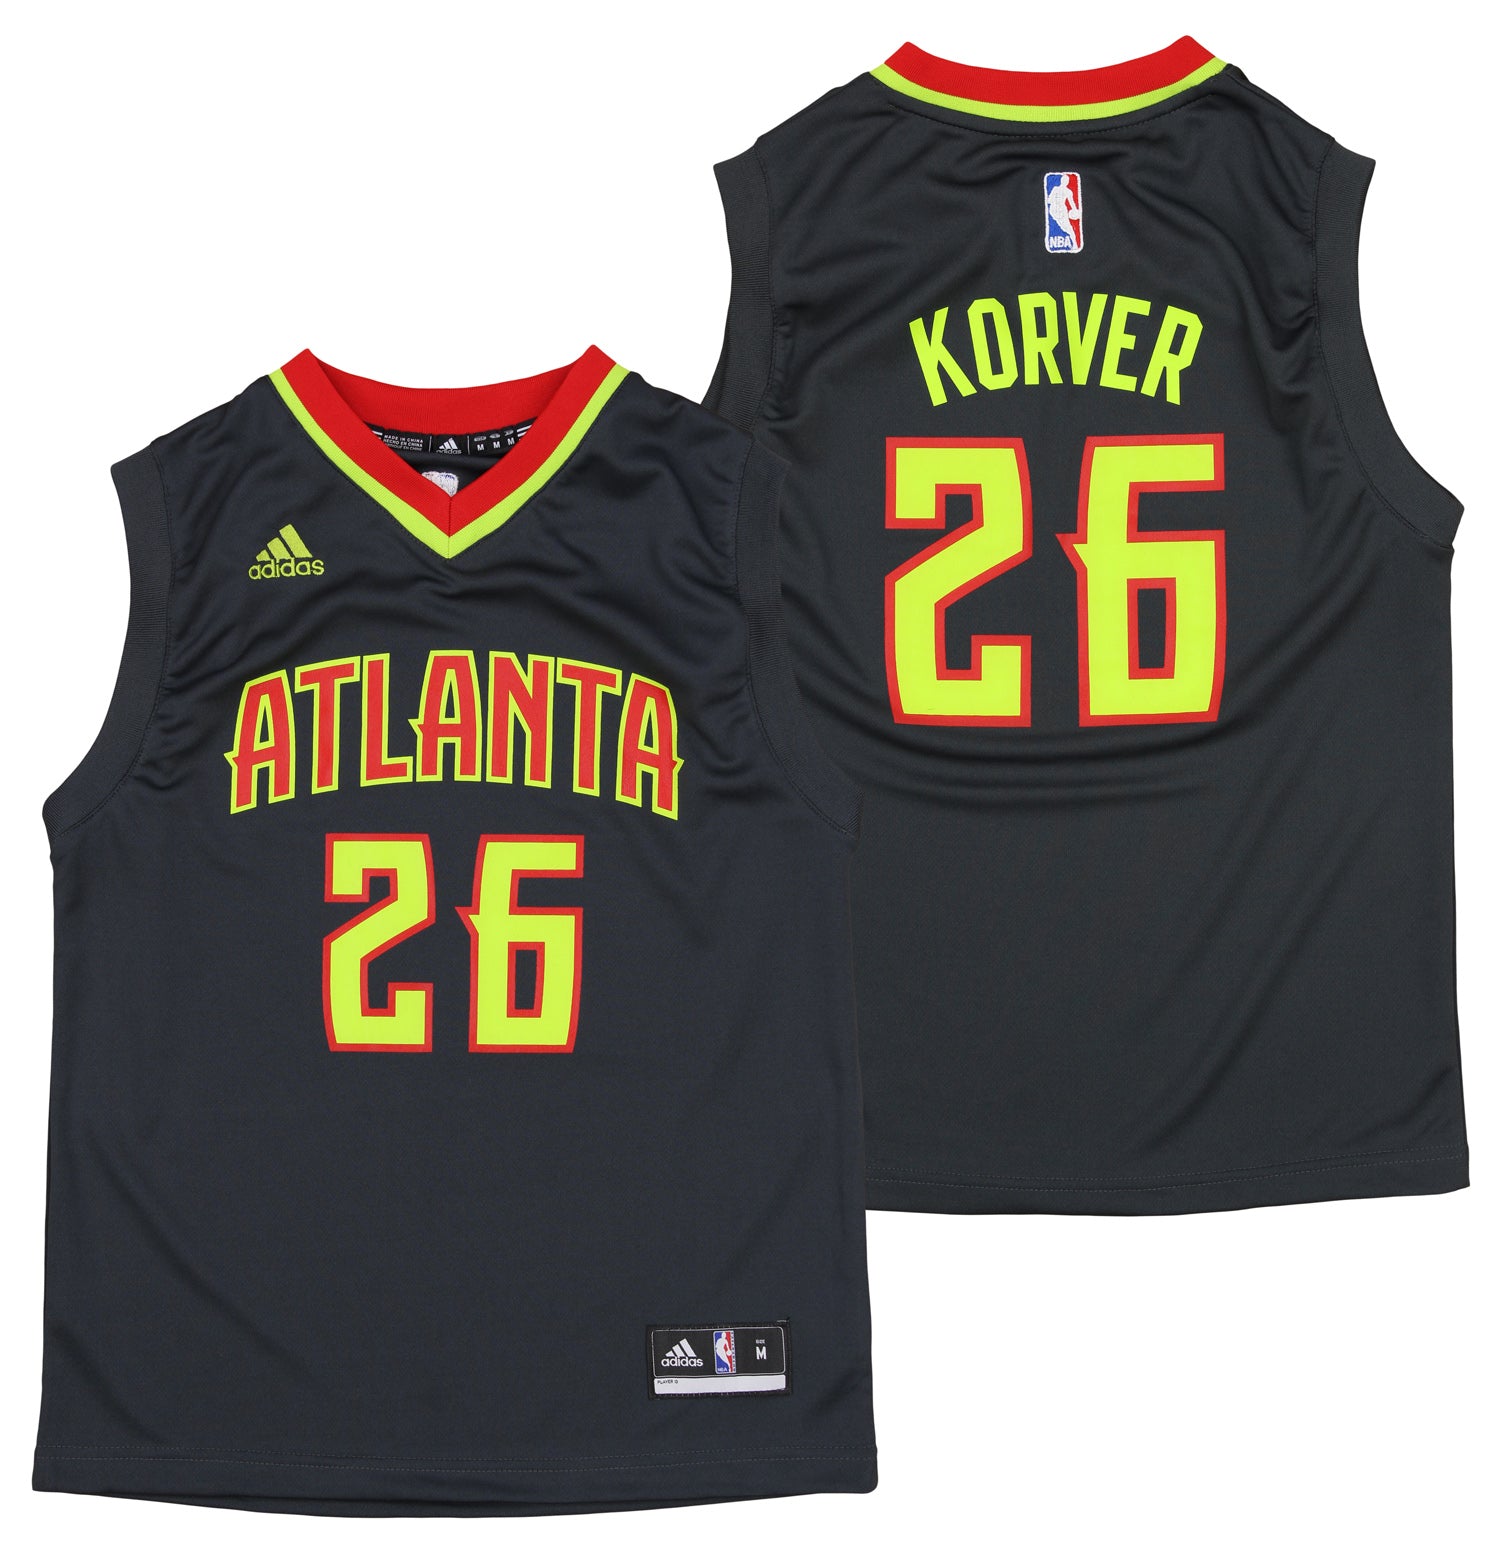 Kyle Korver Jersey Poster for Sale by Jayscreations